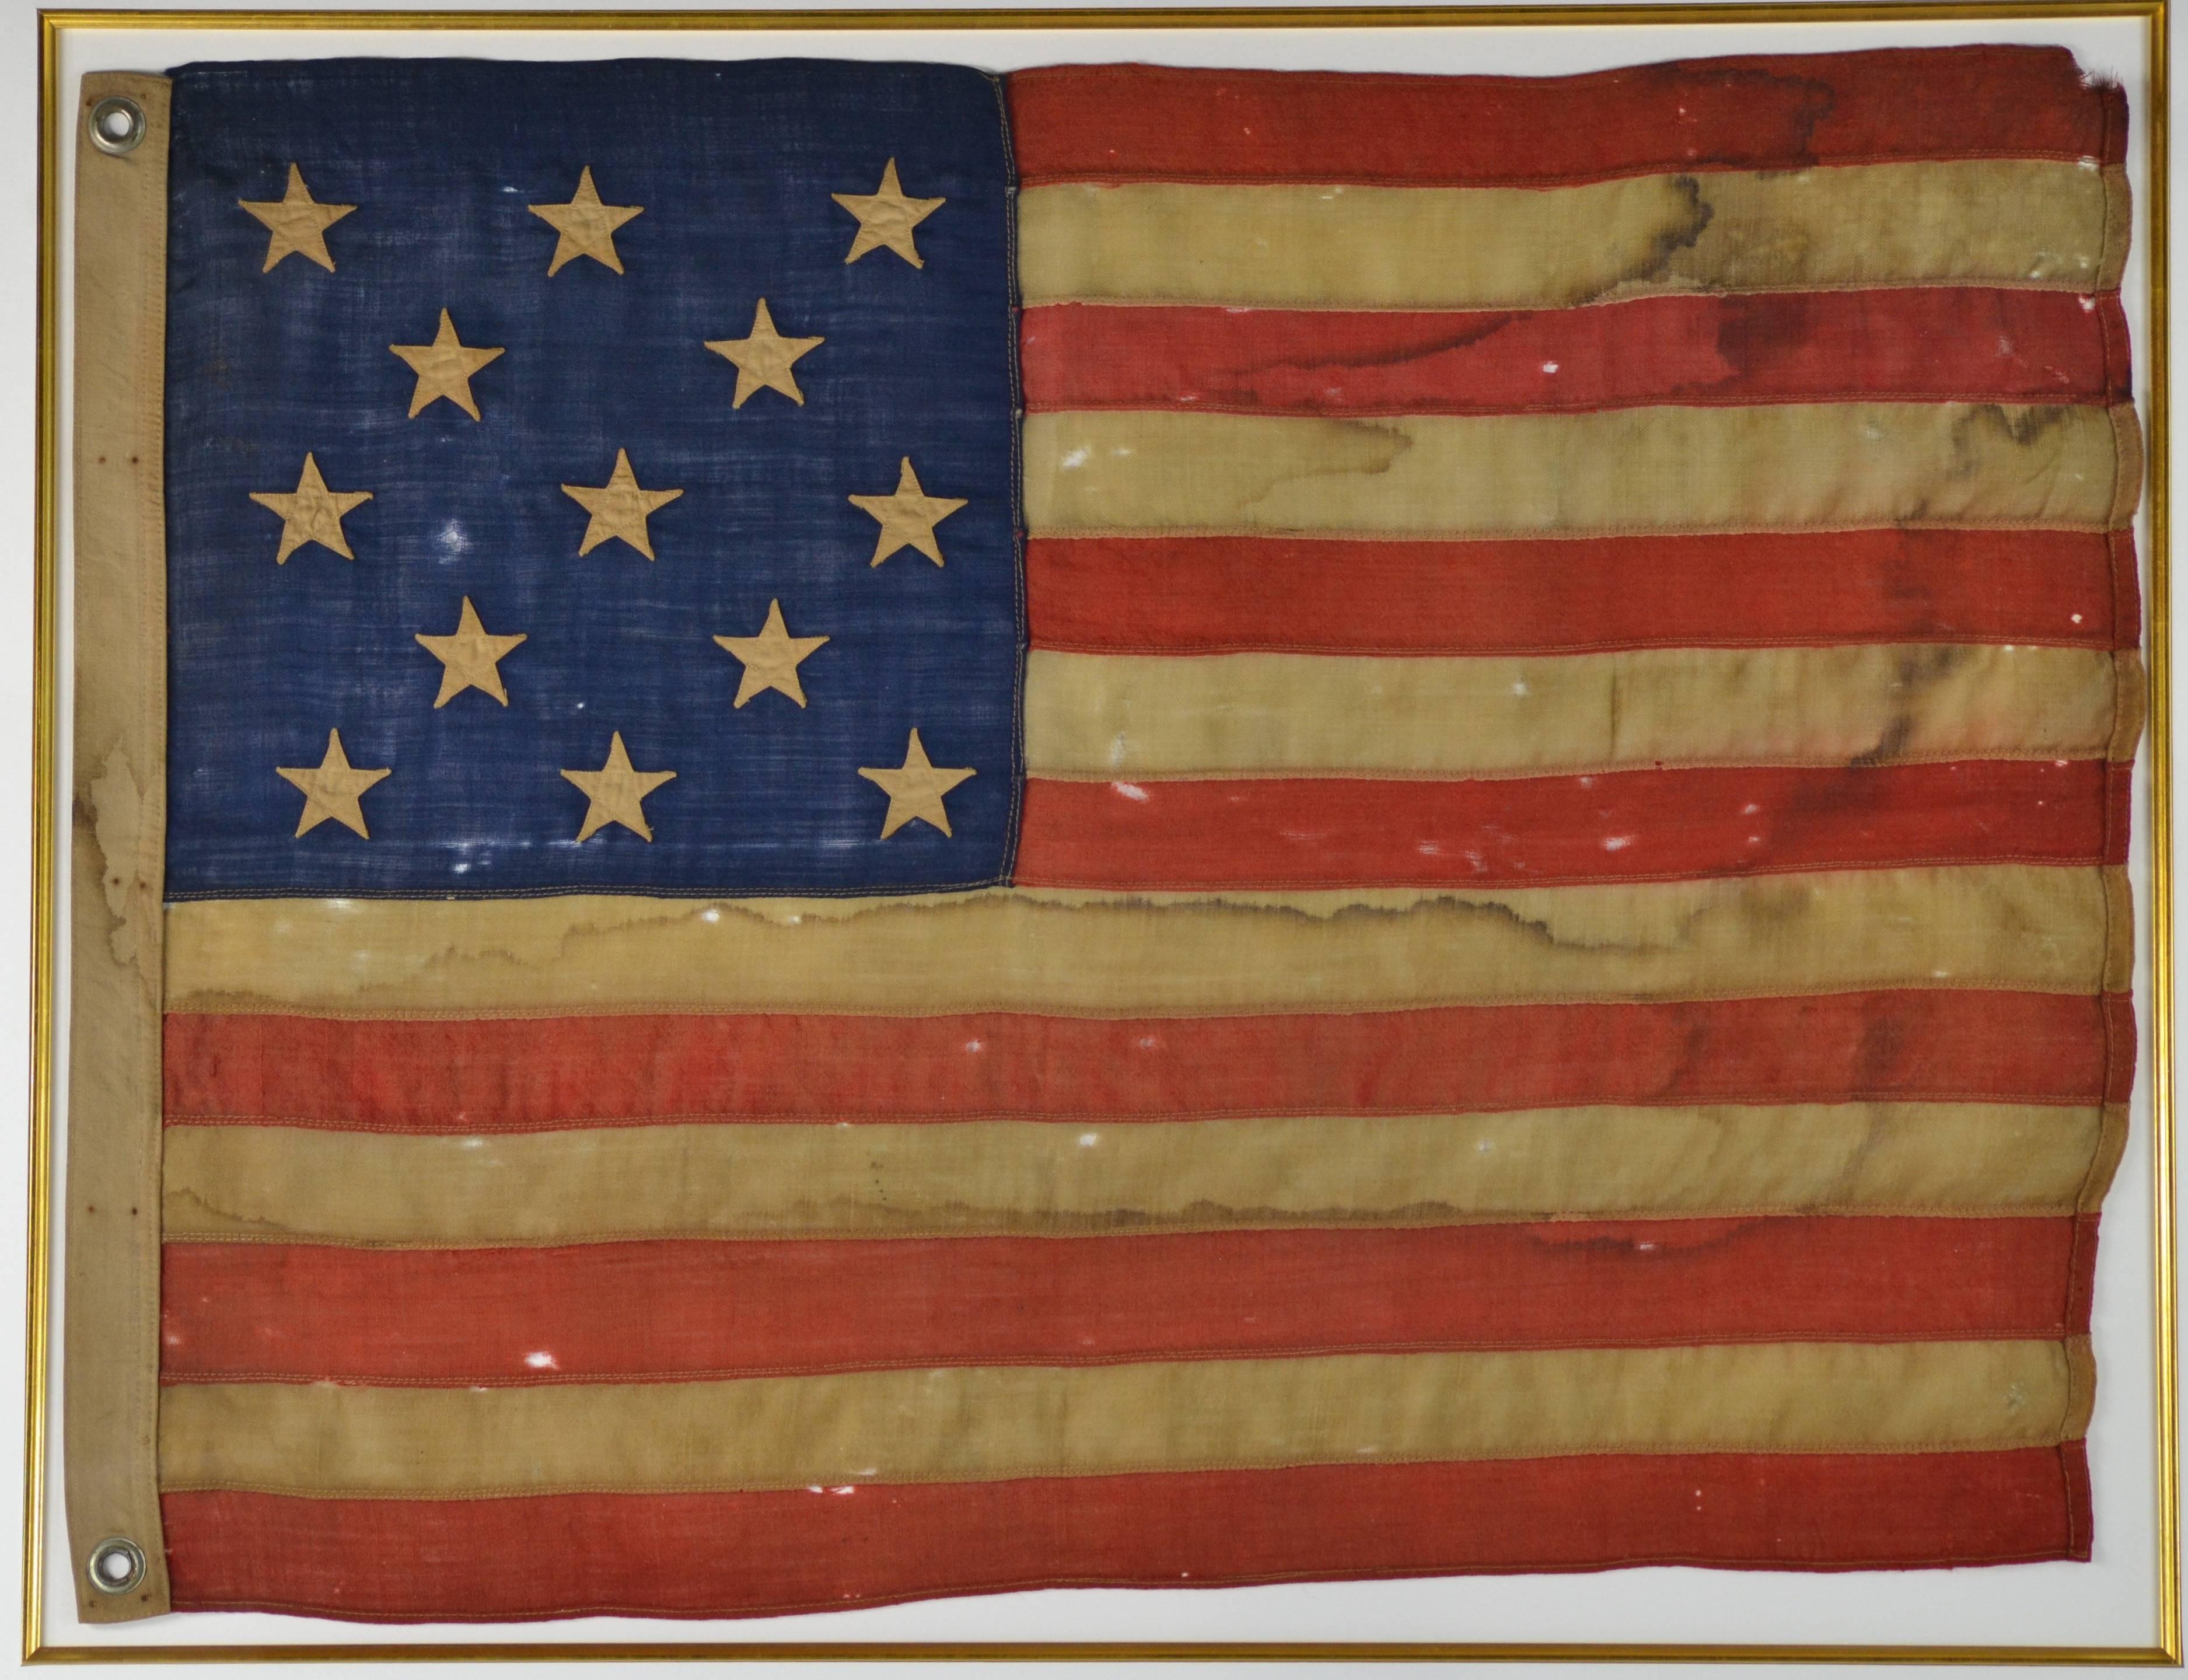 Gorgeous authentic antique 13 Star Flag. The color is incredible, its like its producing a golden glow. The flag is hand treadle sewn, made of wool individual treadle sewn and the canton is a wool. The stars are meticulously sewn and are quite